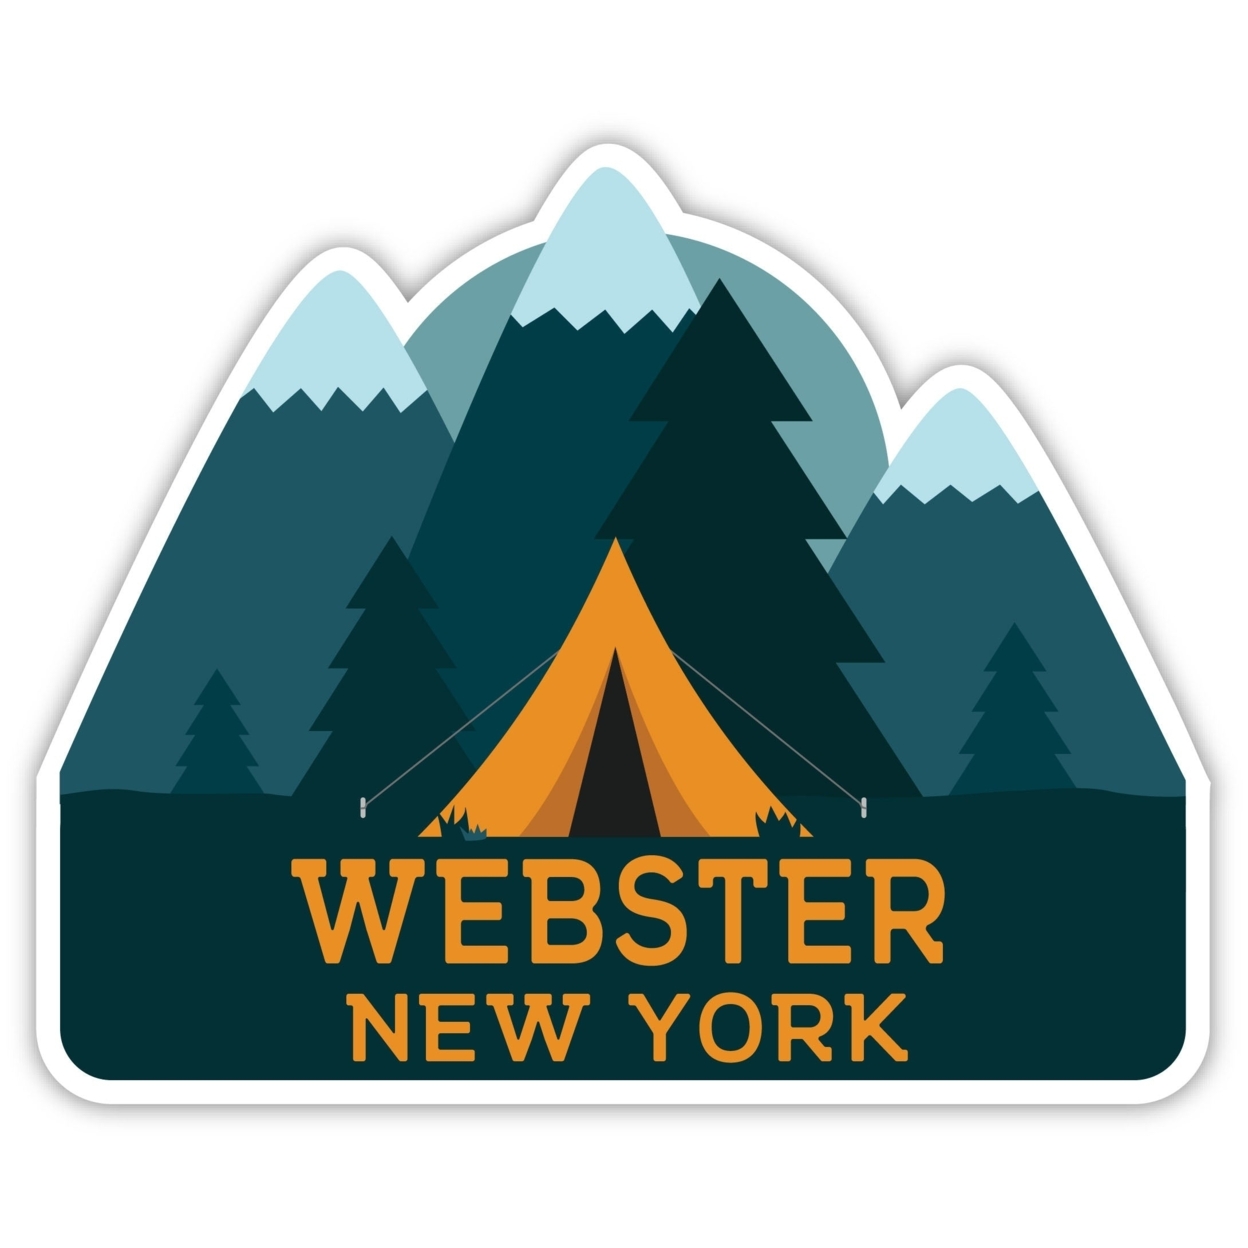 Webster New York Souvenir Decorative Stickers (Choose Theme And Size) - Single Unit, 2-Inch, Tent